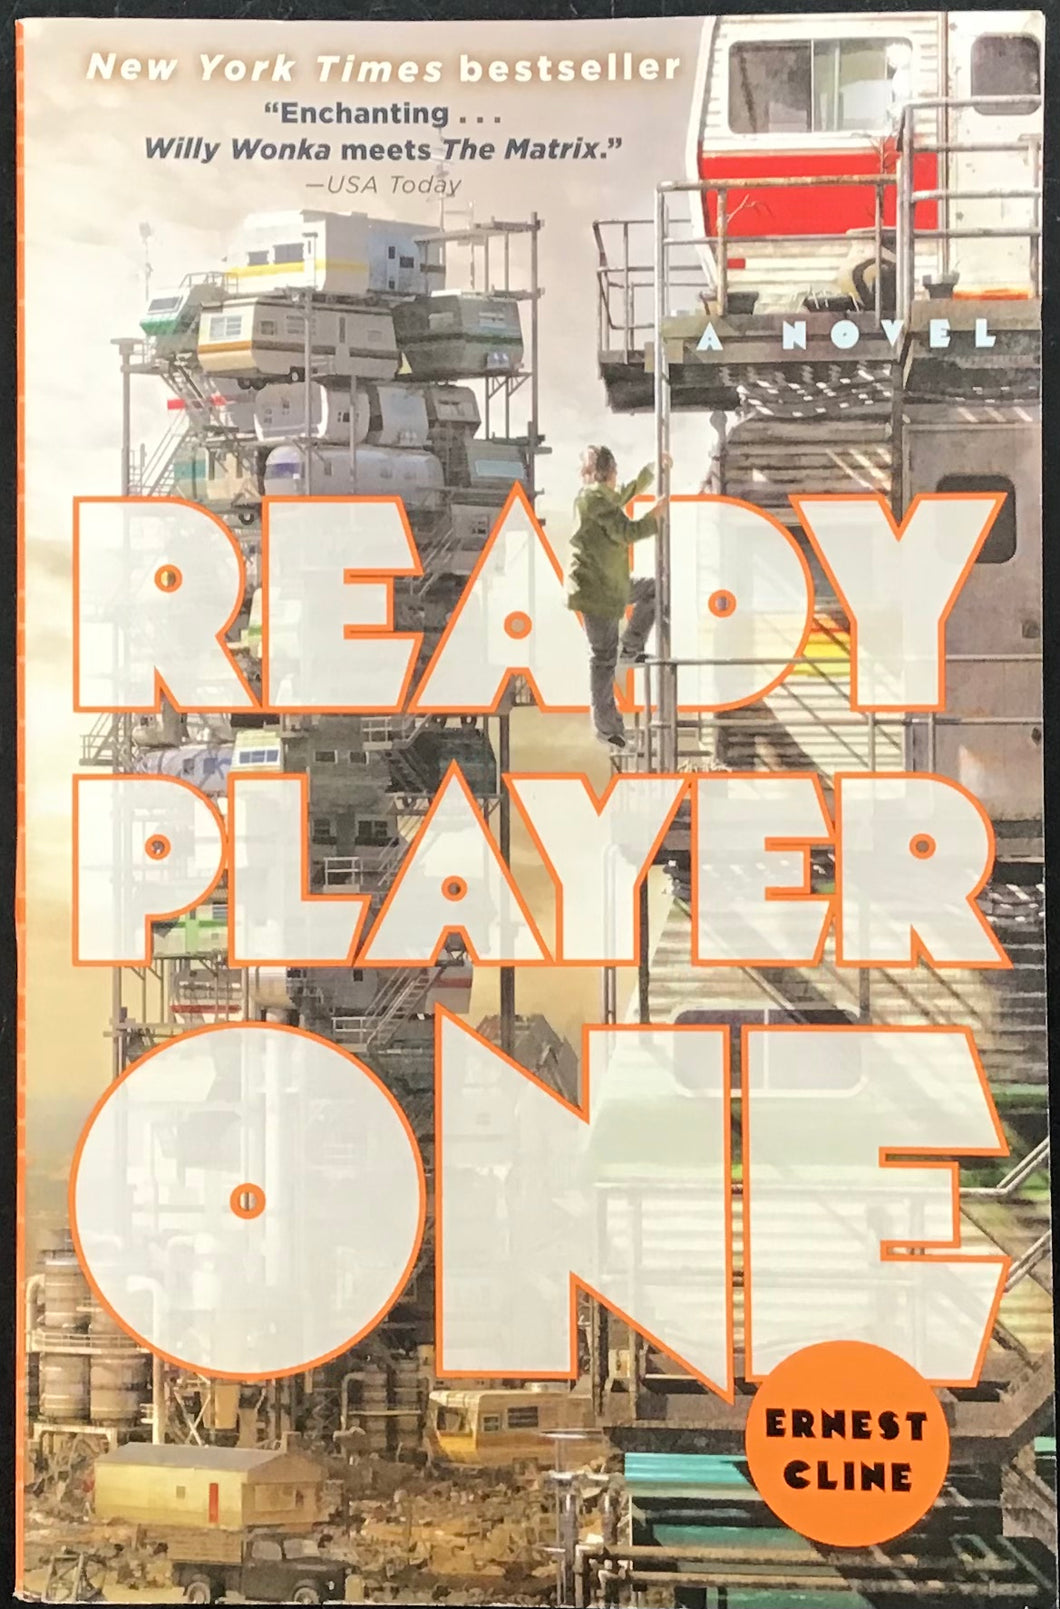 Ready Player One, by Ernest Cline